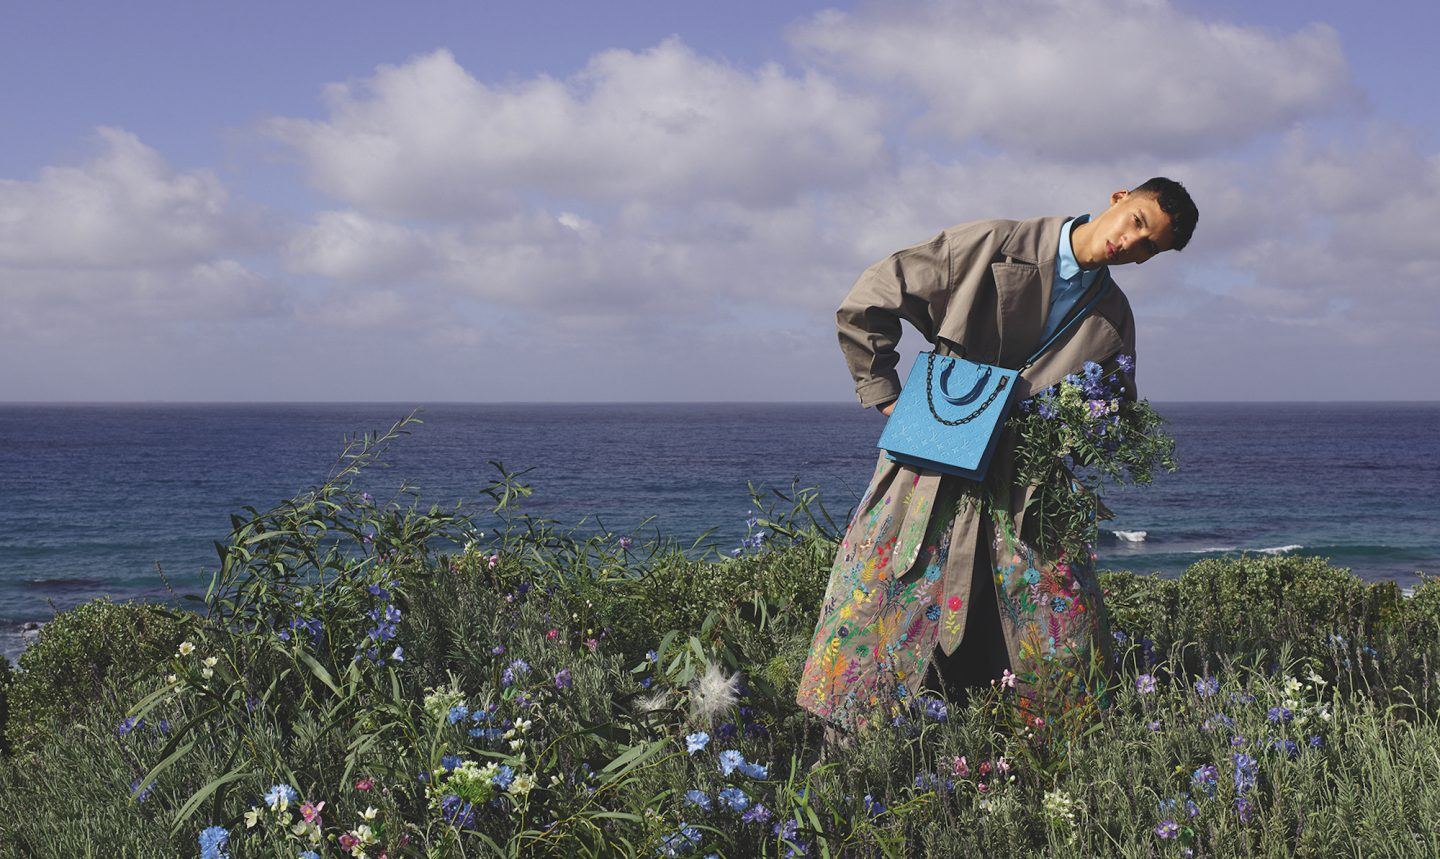 Louis Vuitton's New Campaign Celebrates Flowers and Boyhood - IGNANT